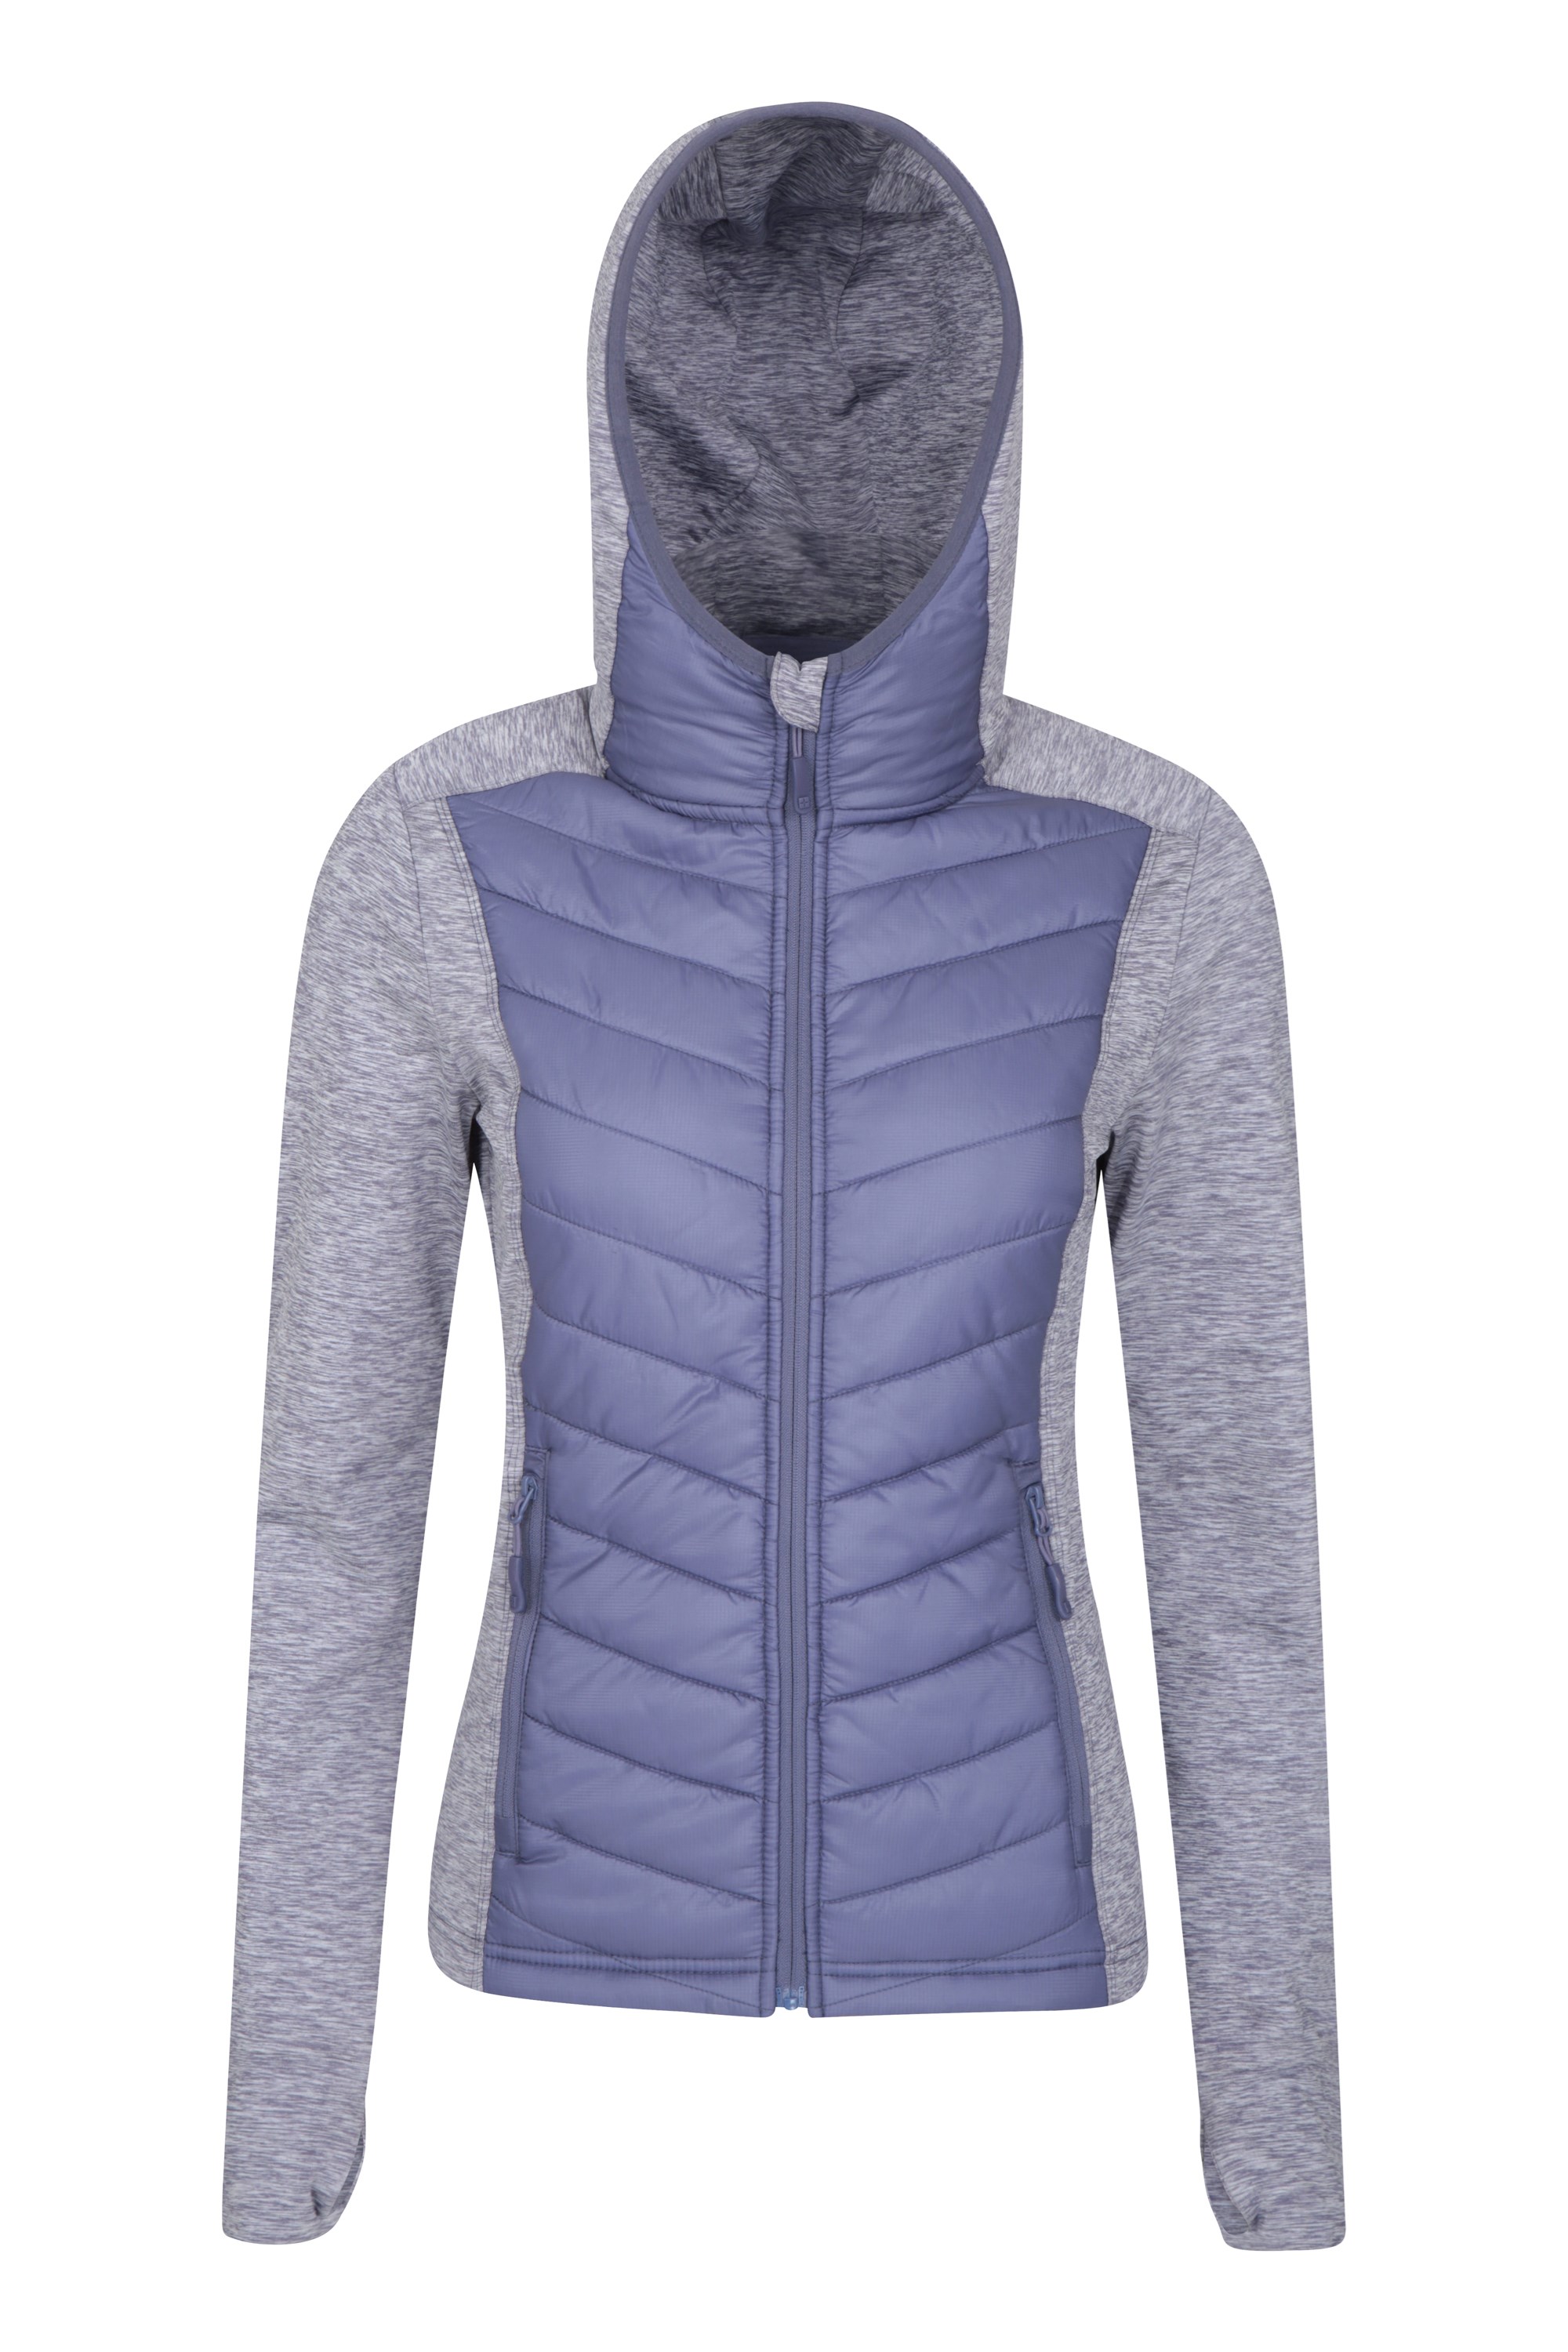 Mountain Warehouse Action Packed Womens Padded Jacket Purple